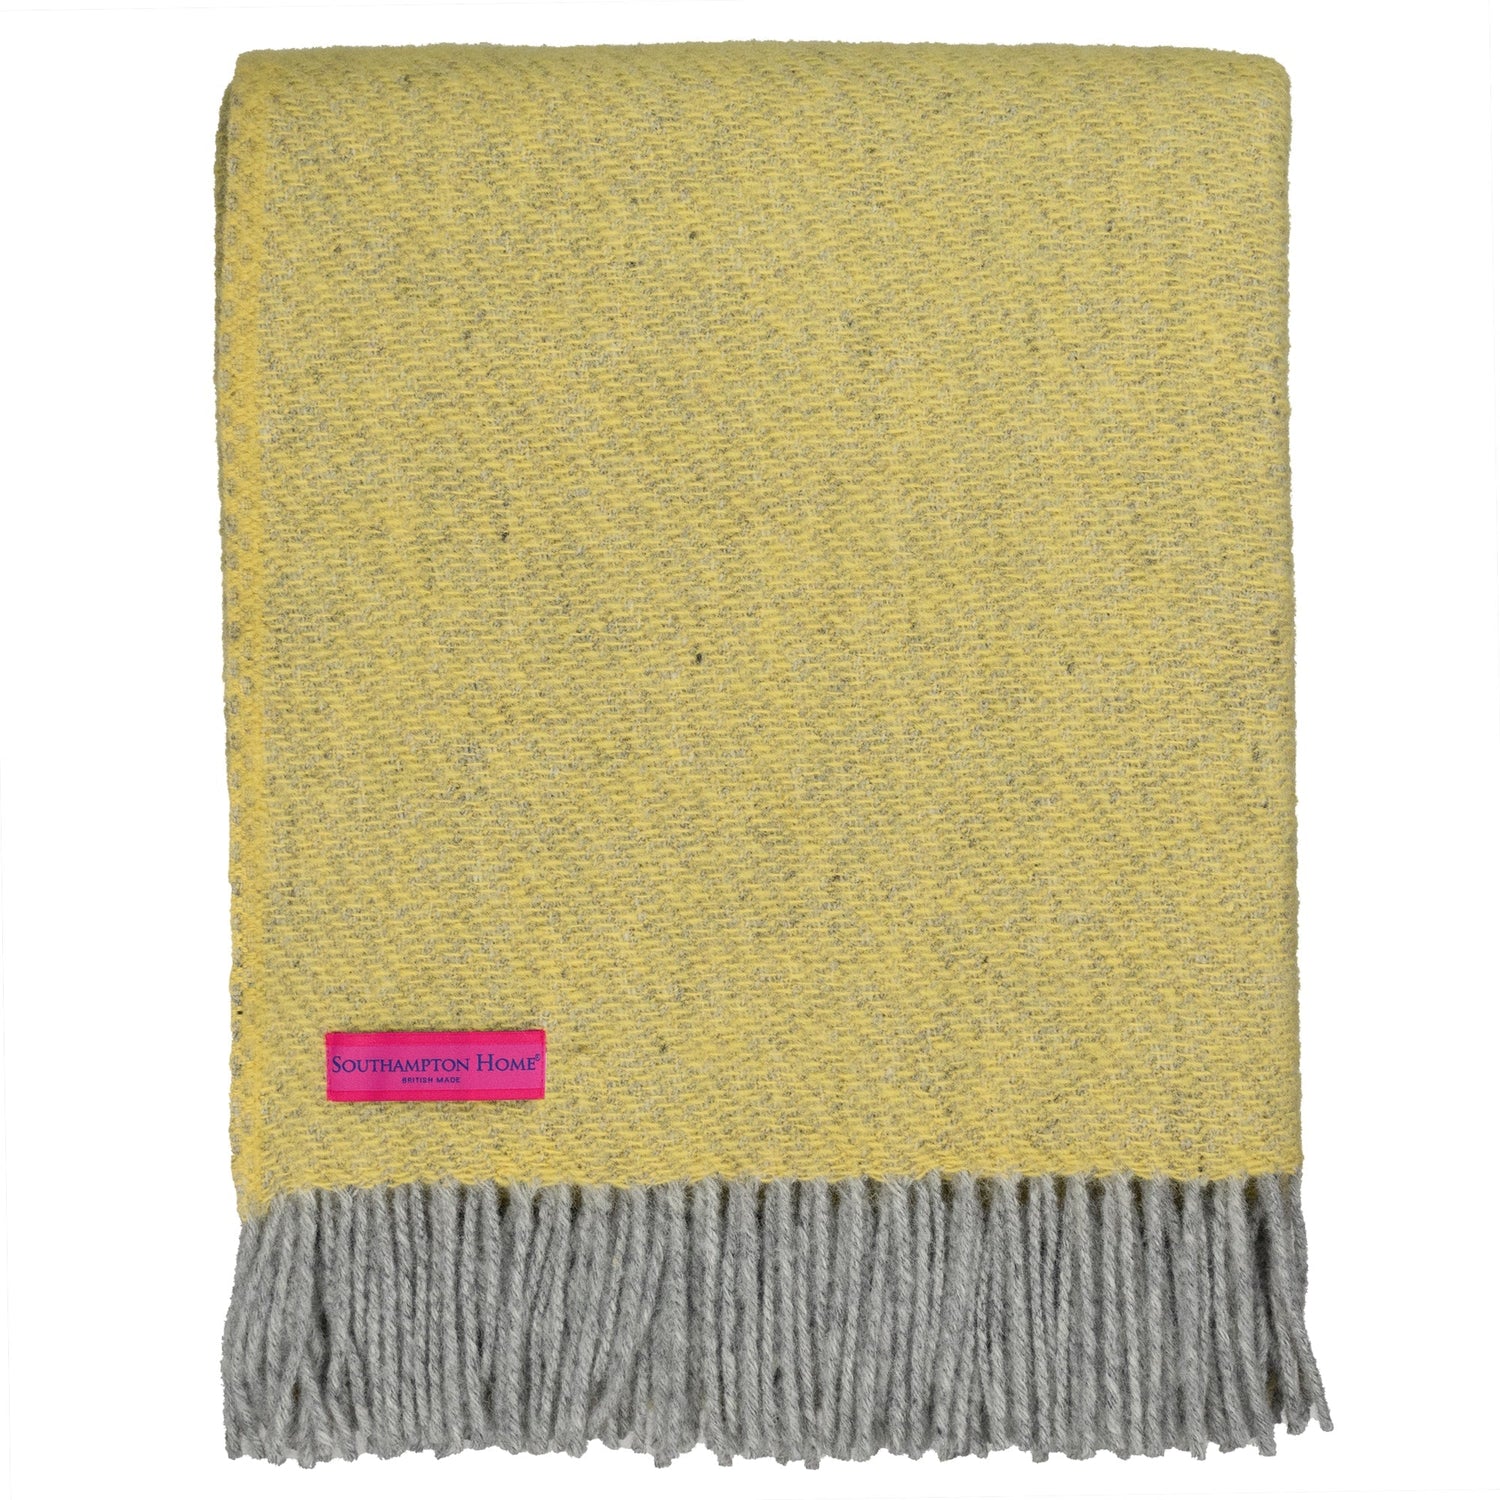 Southampton Home Wool Twill Throw Blanket (Yellow Daisy)-Throws and Blankets-810032752460-SHWoolTwillLemon-Prince of Scots